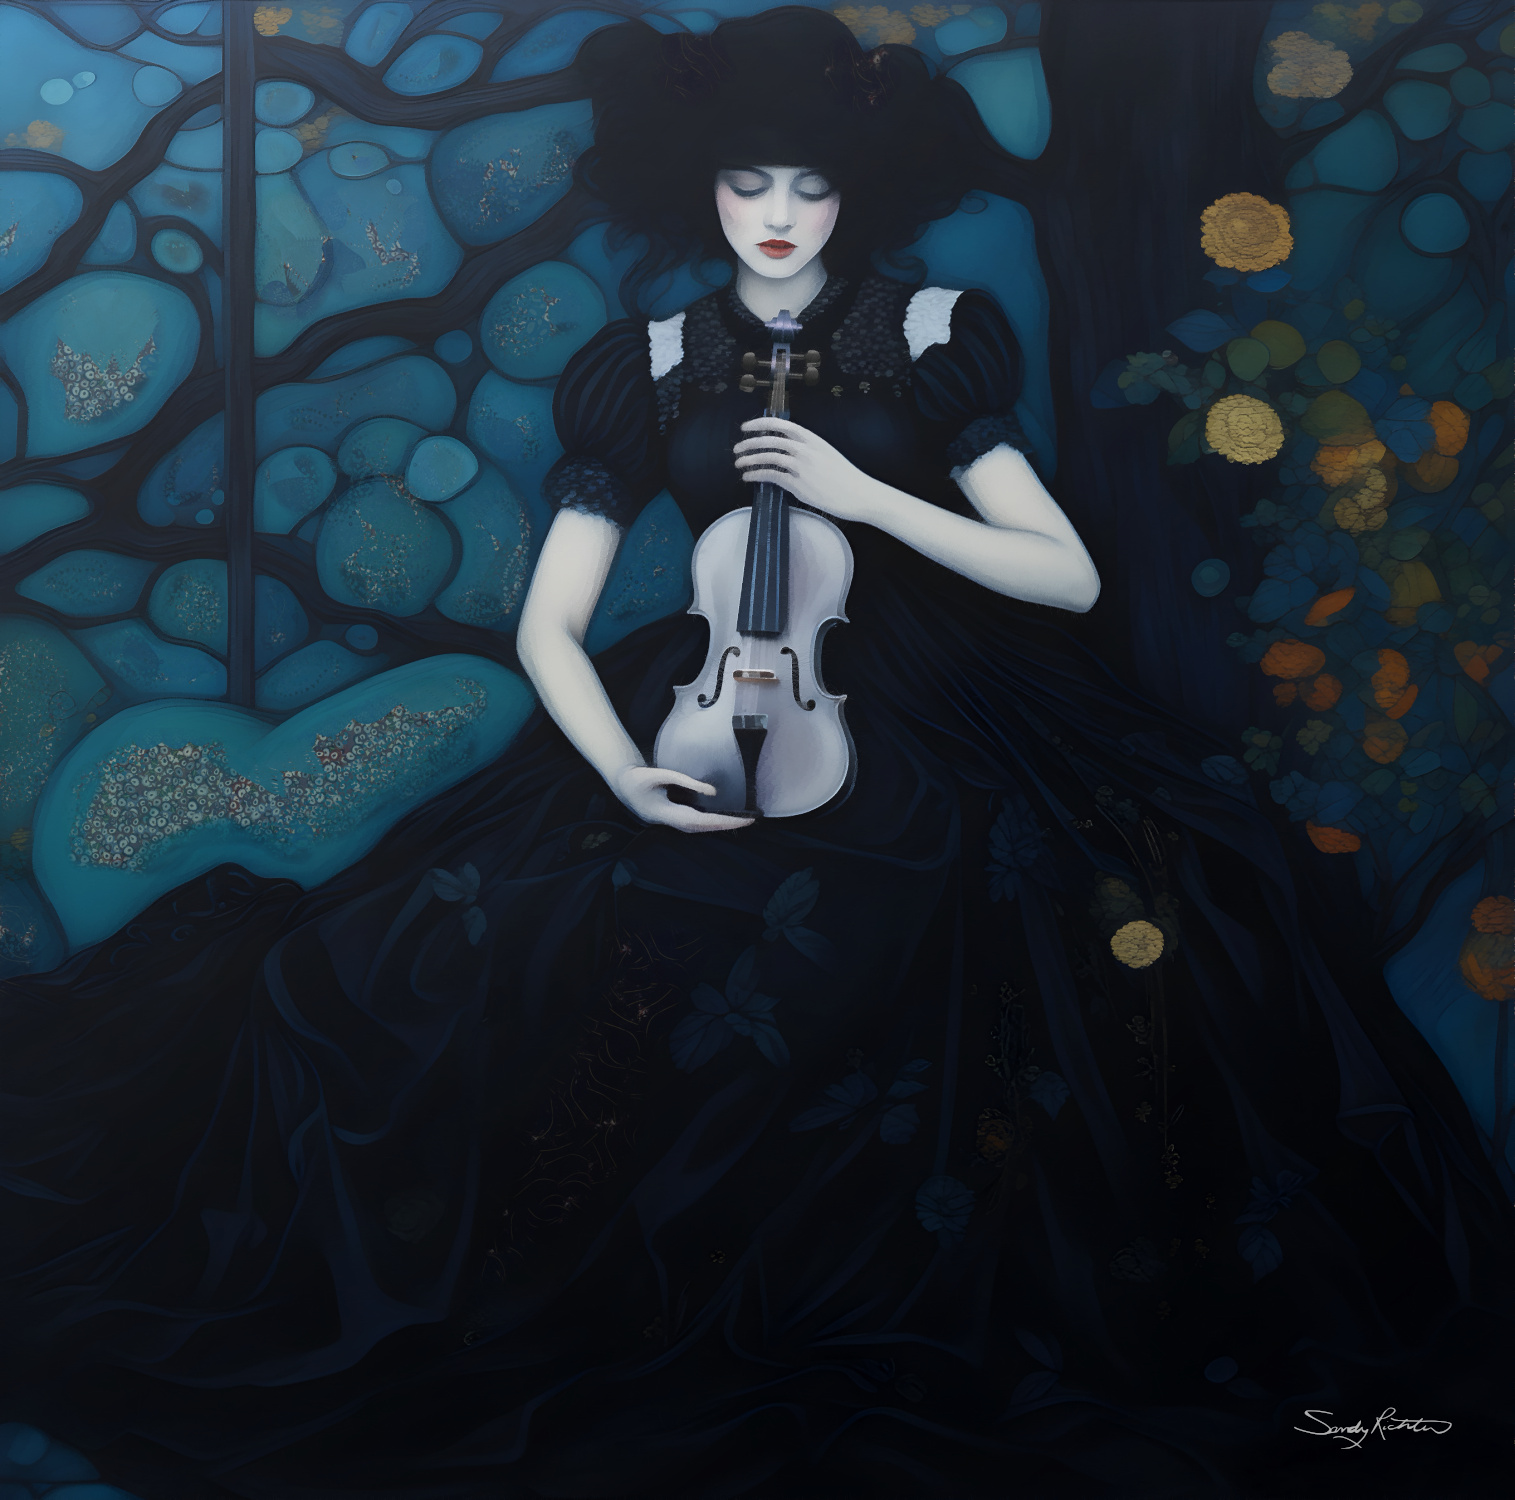 Beautiful Gothic Girl with Violin Painting This Gothic beauty strikes a chord with her haunting violin 🎻